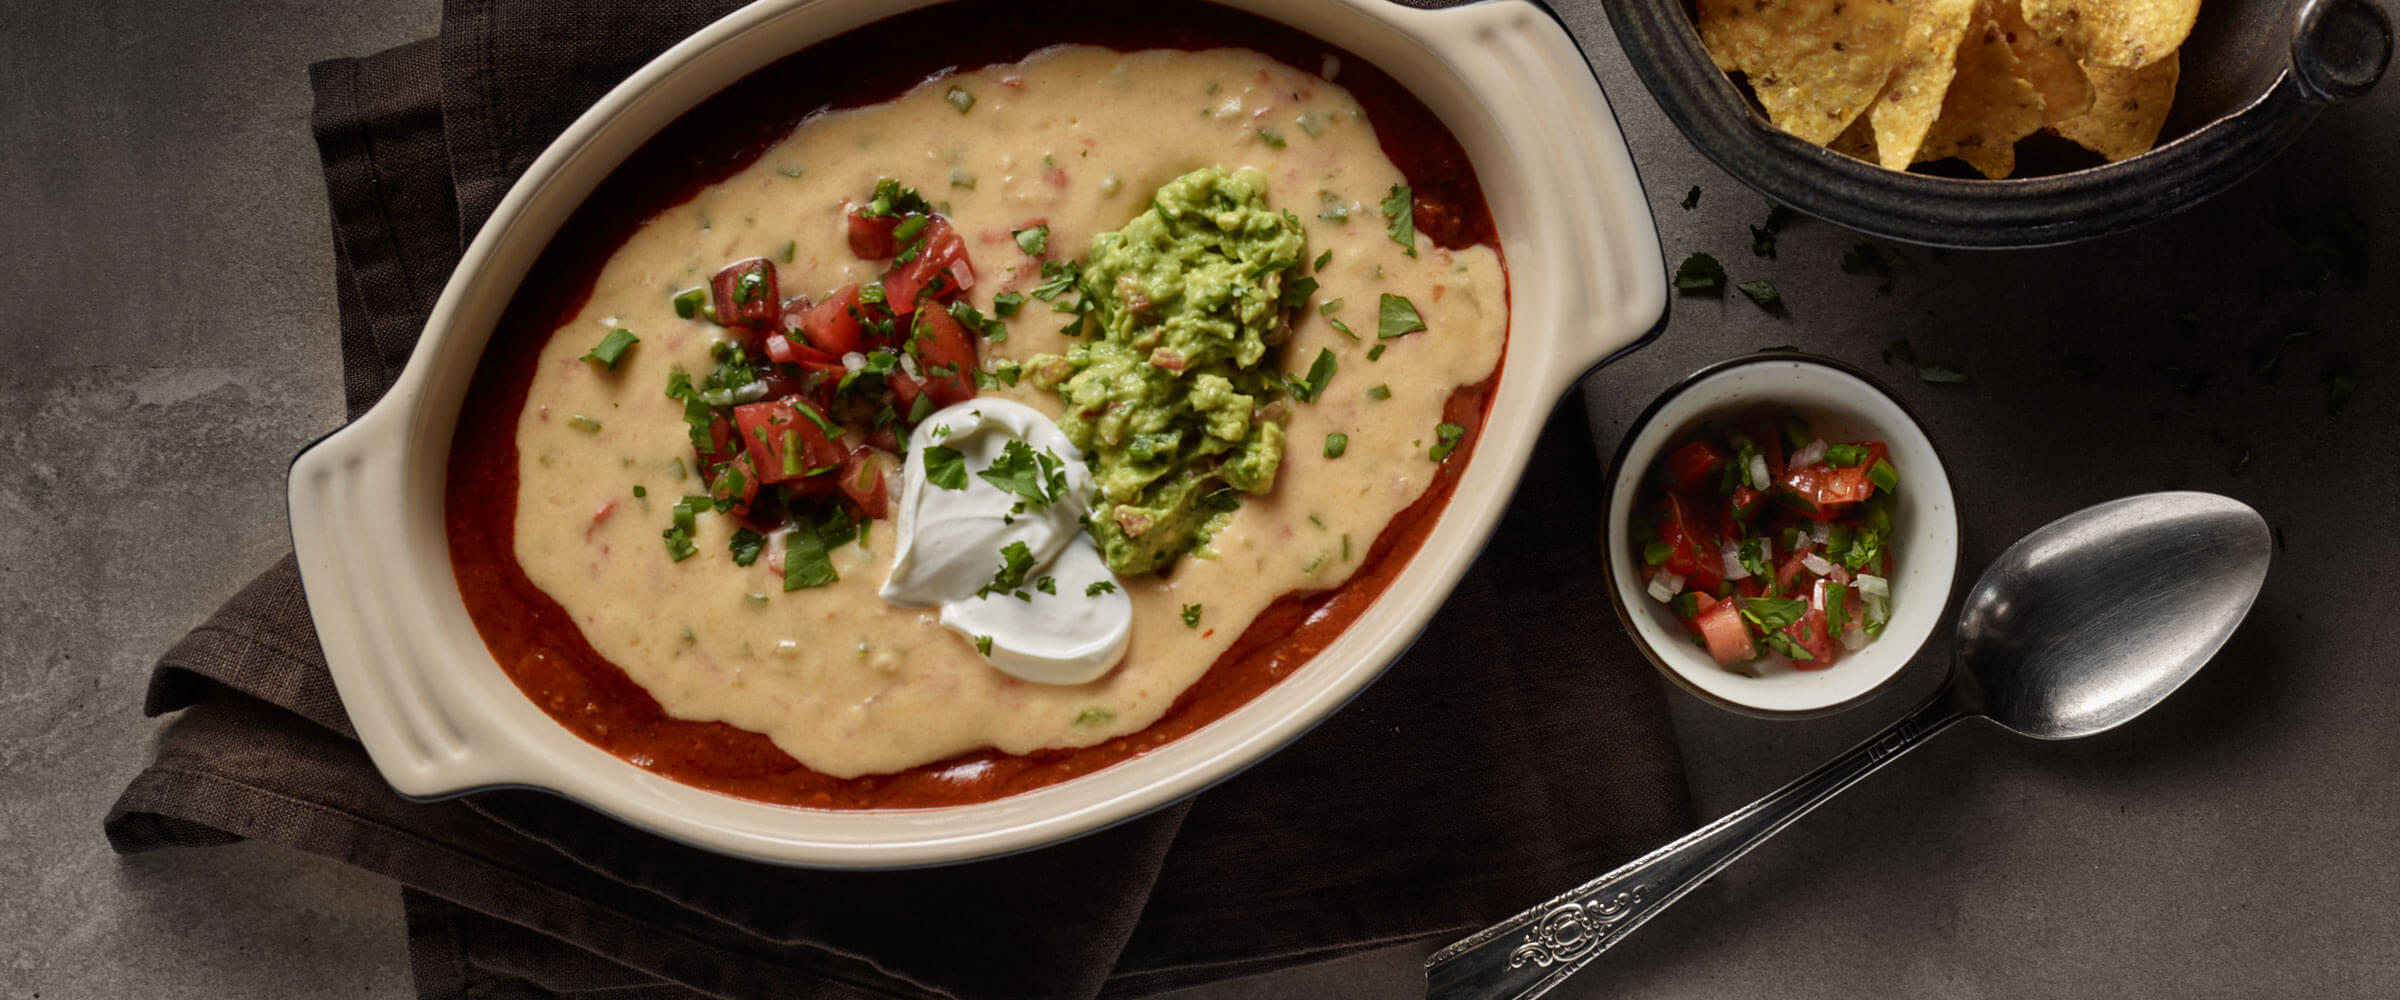 Chili Con Queso in white dish topped with salsa, sour cream and guacamole with side of chips